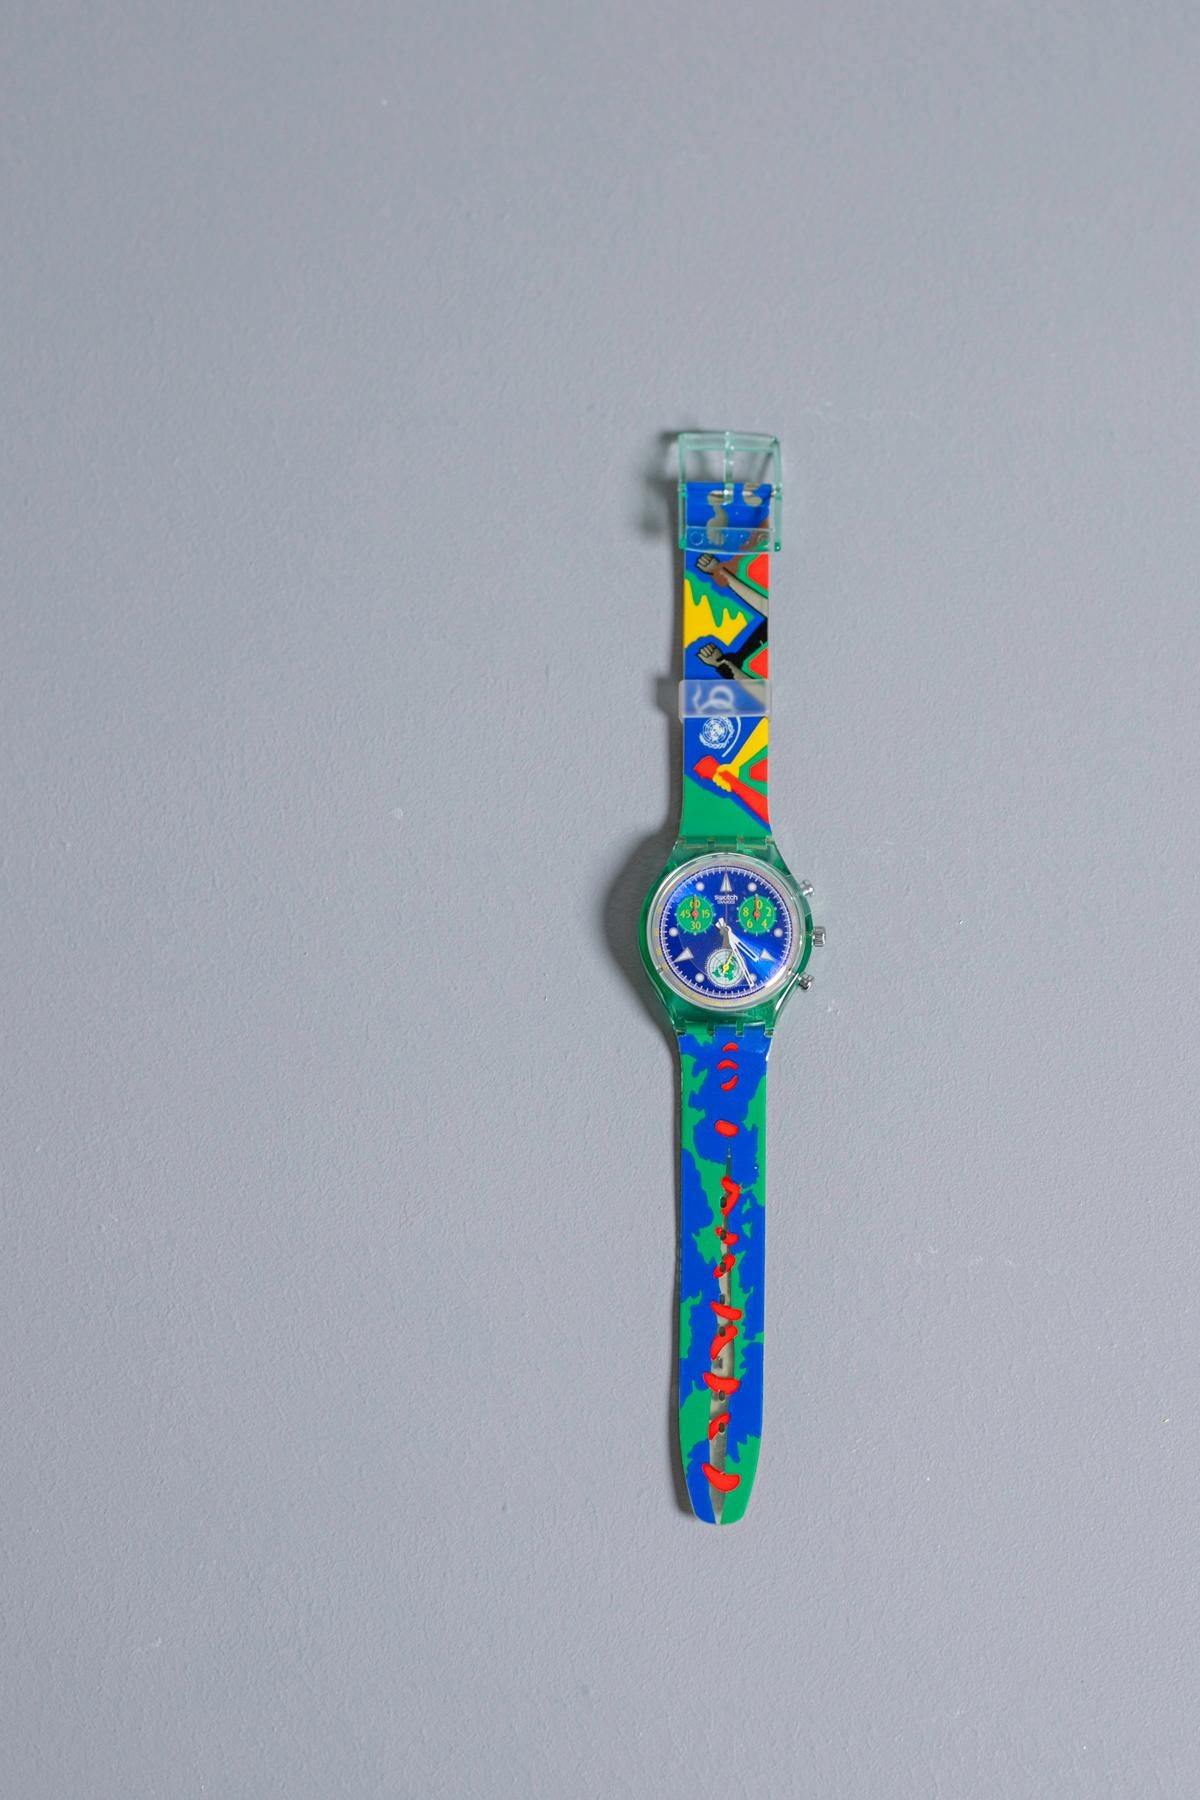 Vintage Swatch from the 1995 collection is dedicated to the 50th anniversary of the United Nations. To celebrate this special anniversary, this Swatch was designed by a group of young artists from around the world. Kept in its original box, this